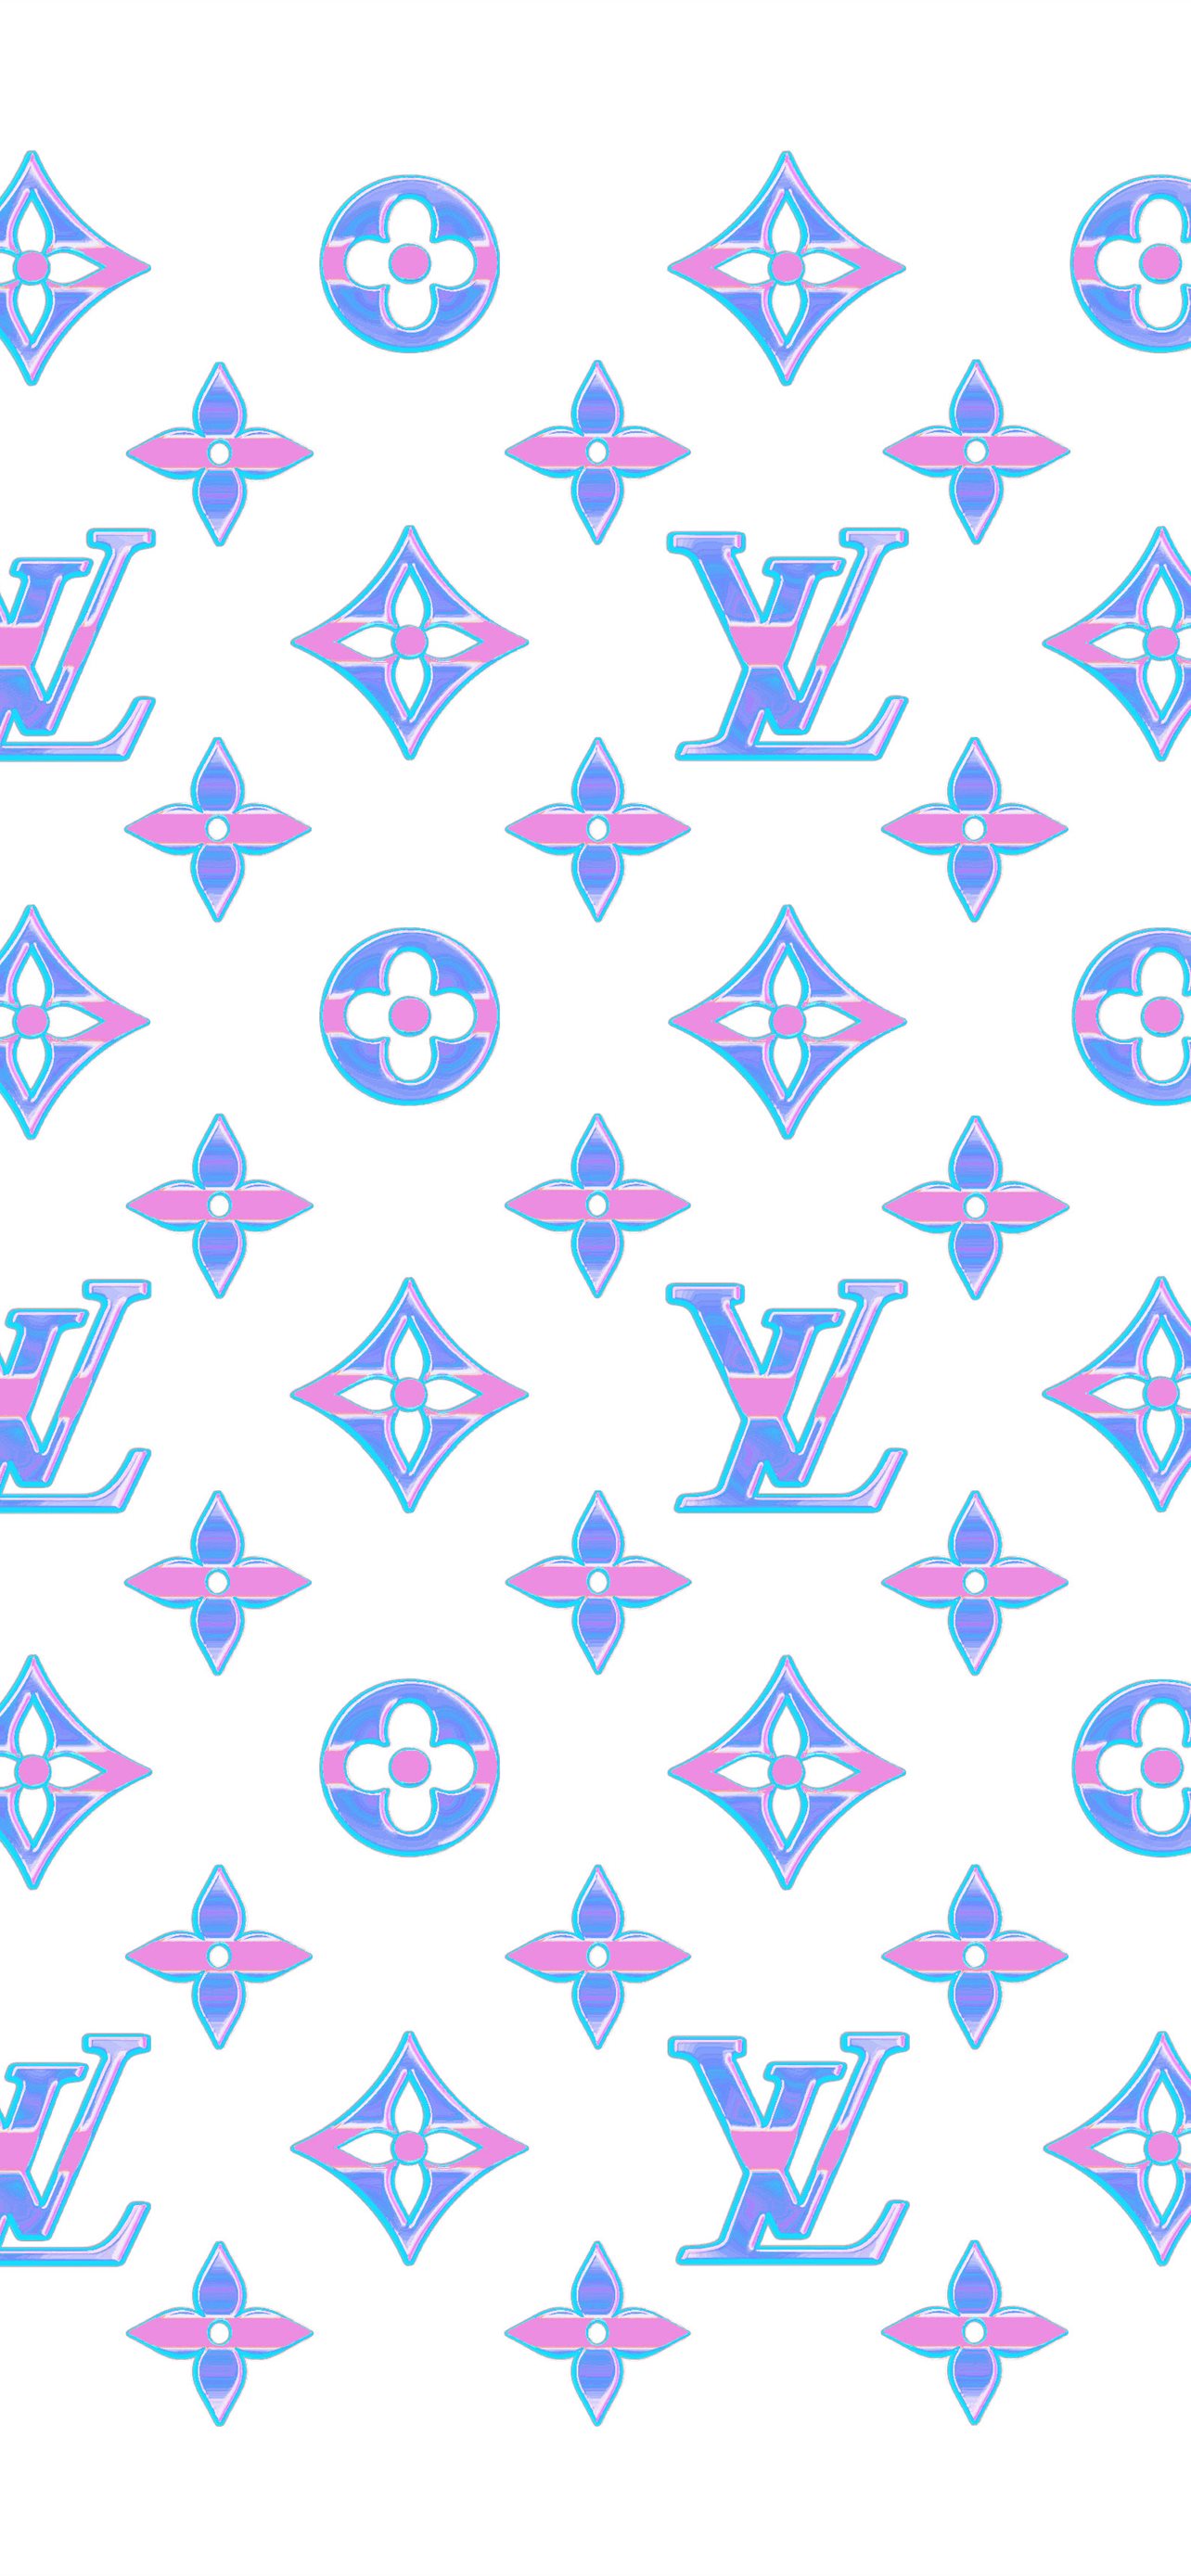 Louis Vuitton Wallpapers, HD Louis Vuitton Backgrounds, Free Images Download